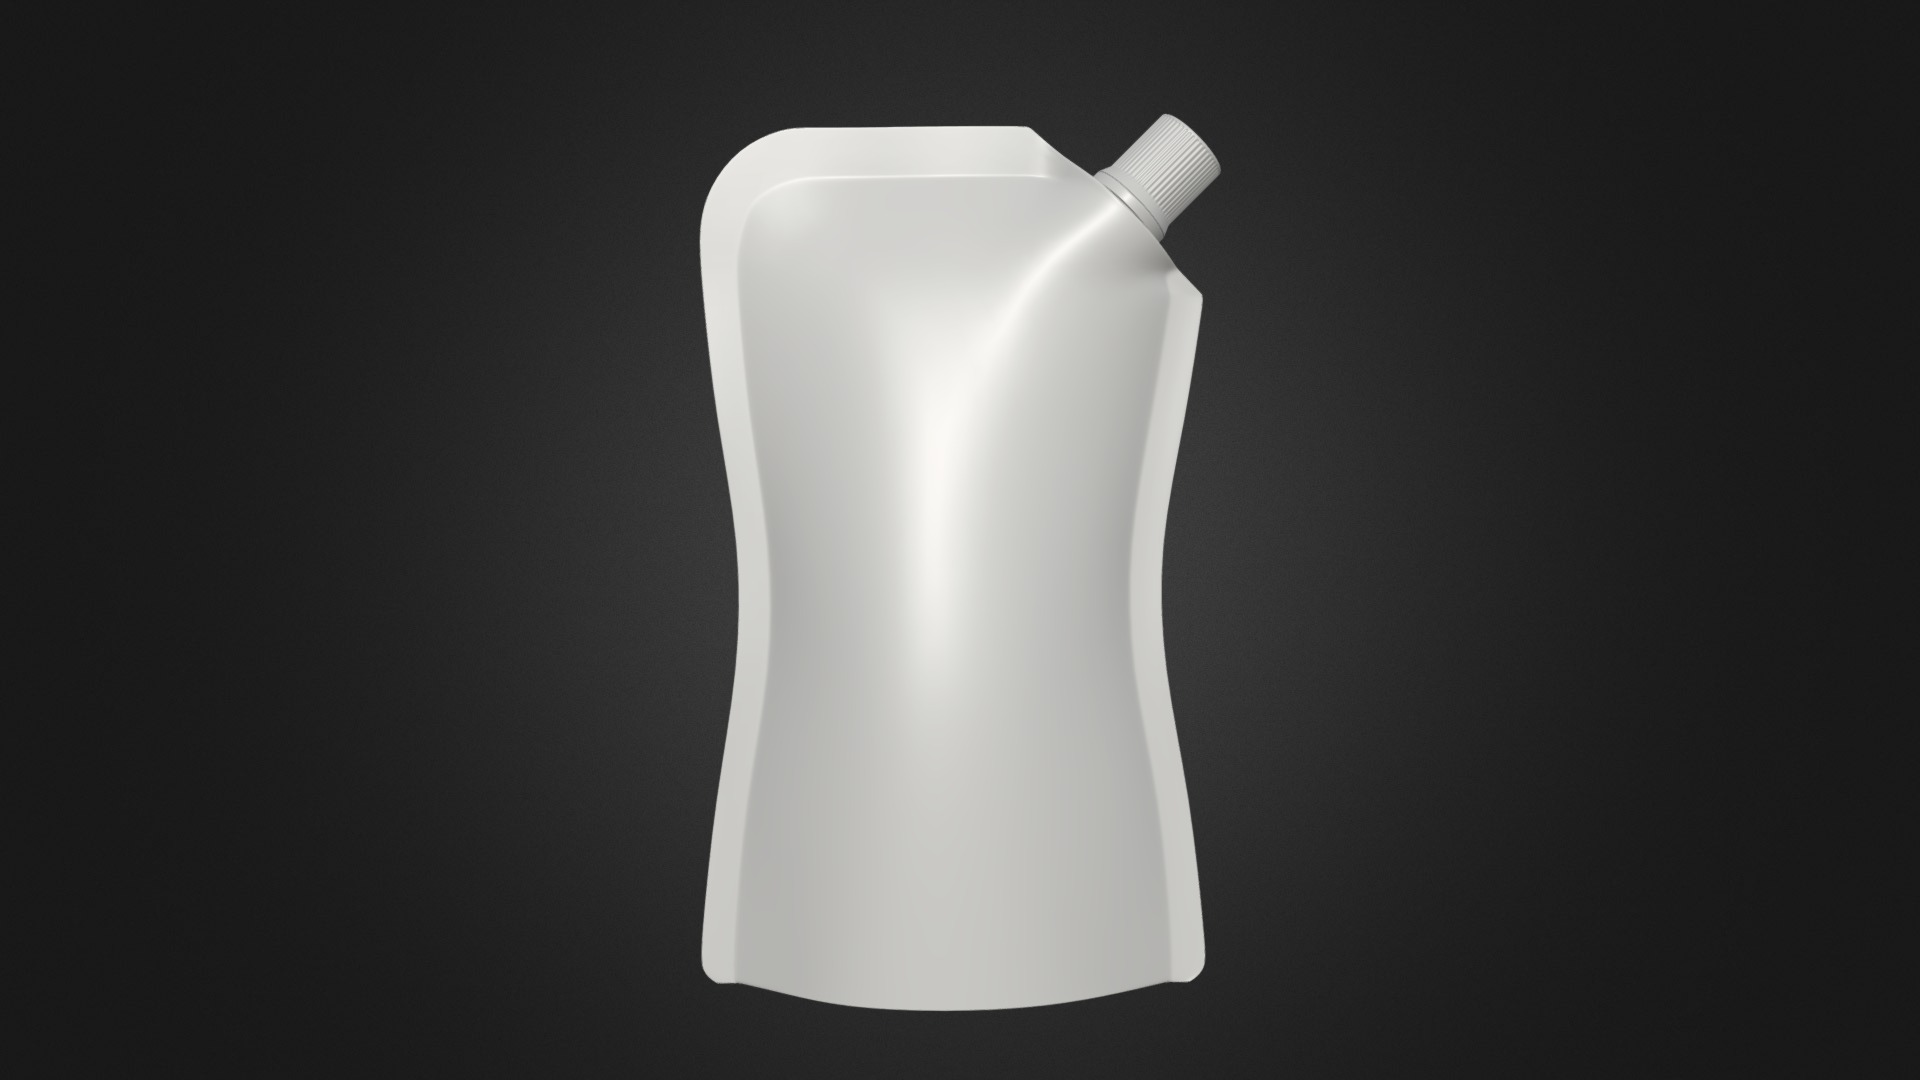 3D model pouch bag 05 - This is a 3D model of the pouch bag 05. The 3D model is about a white lamp shade.